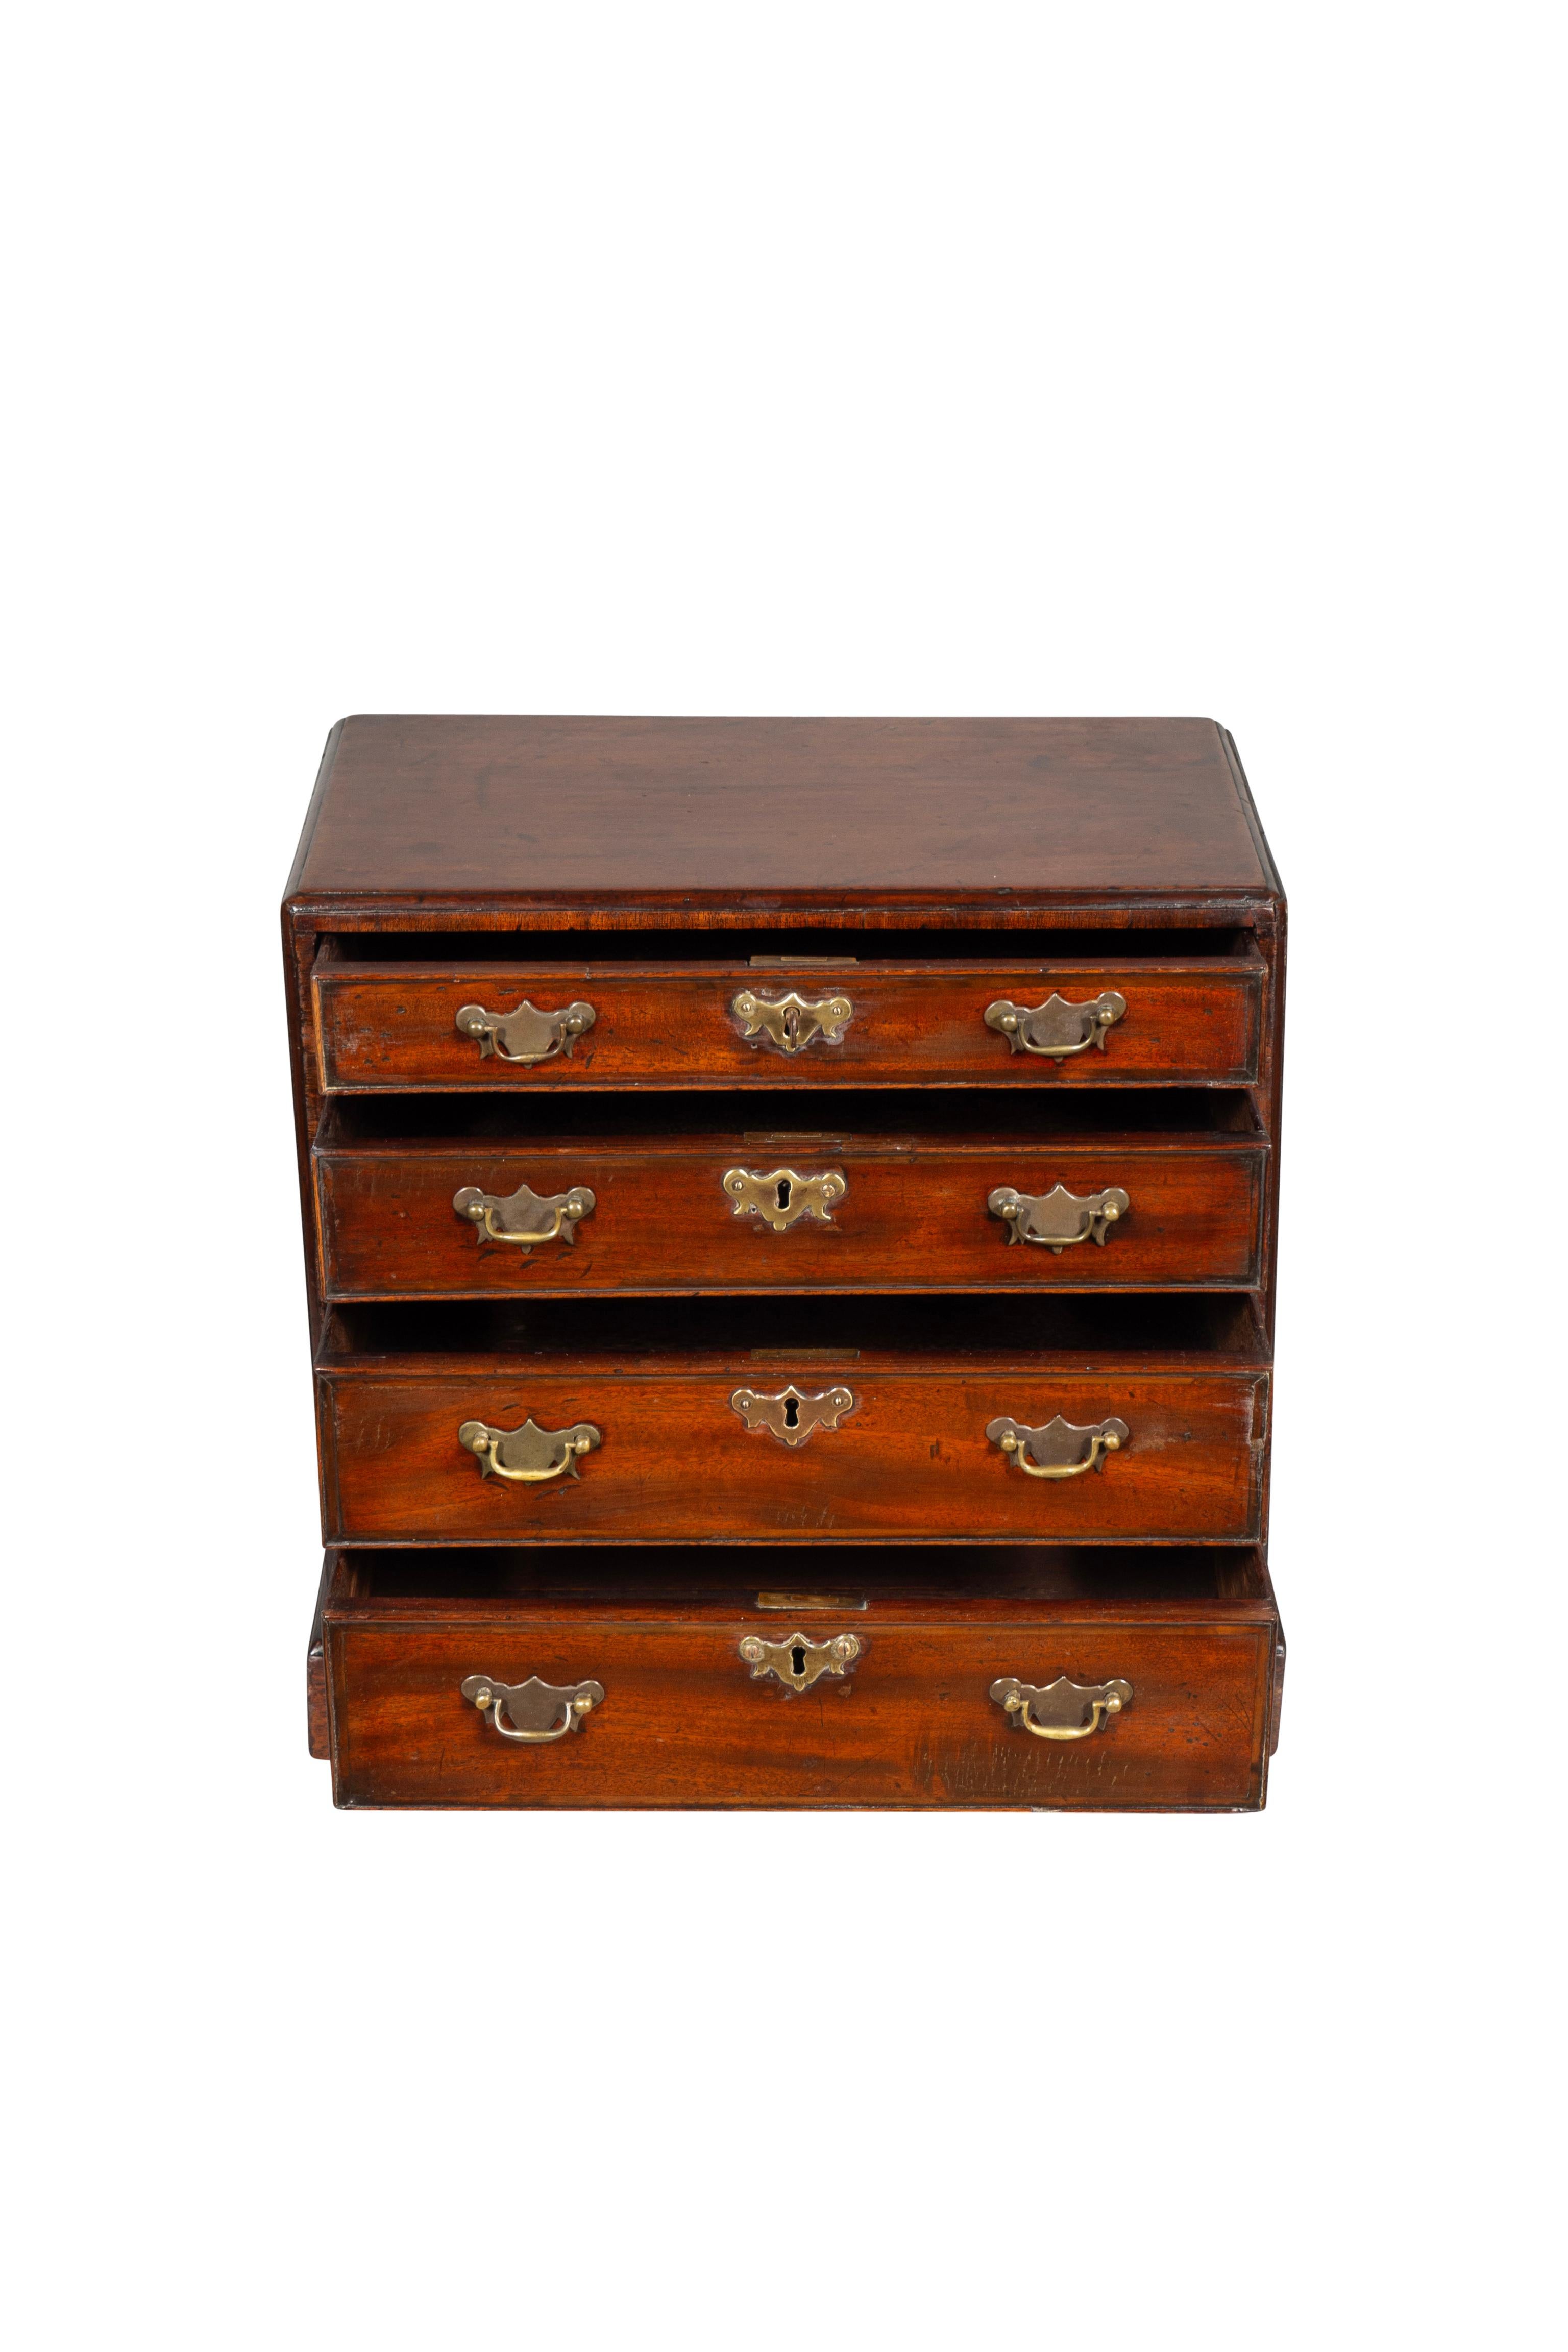 George III Mahogany Miniature Chest Of Drawers For Sale 1